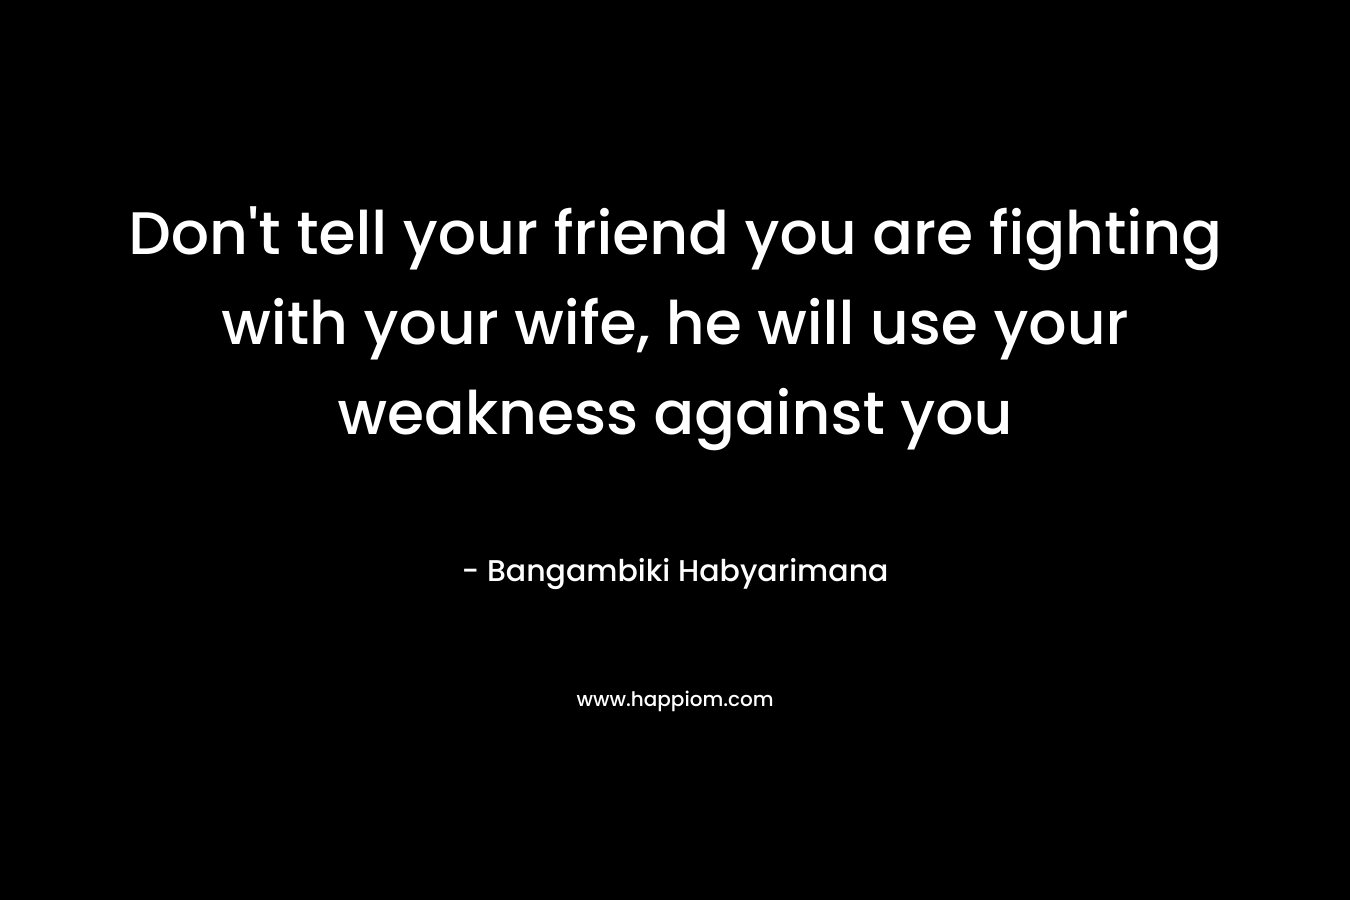 Don't tell your friend you are fighting with your wife, he will use your weakness against you